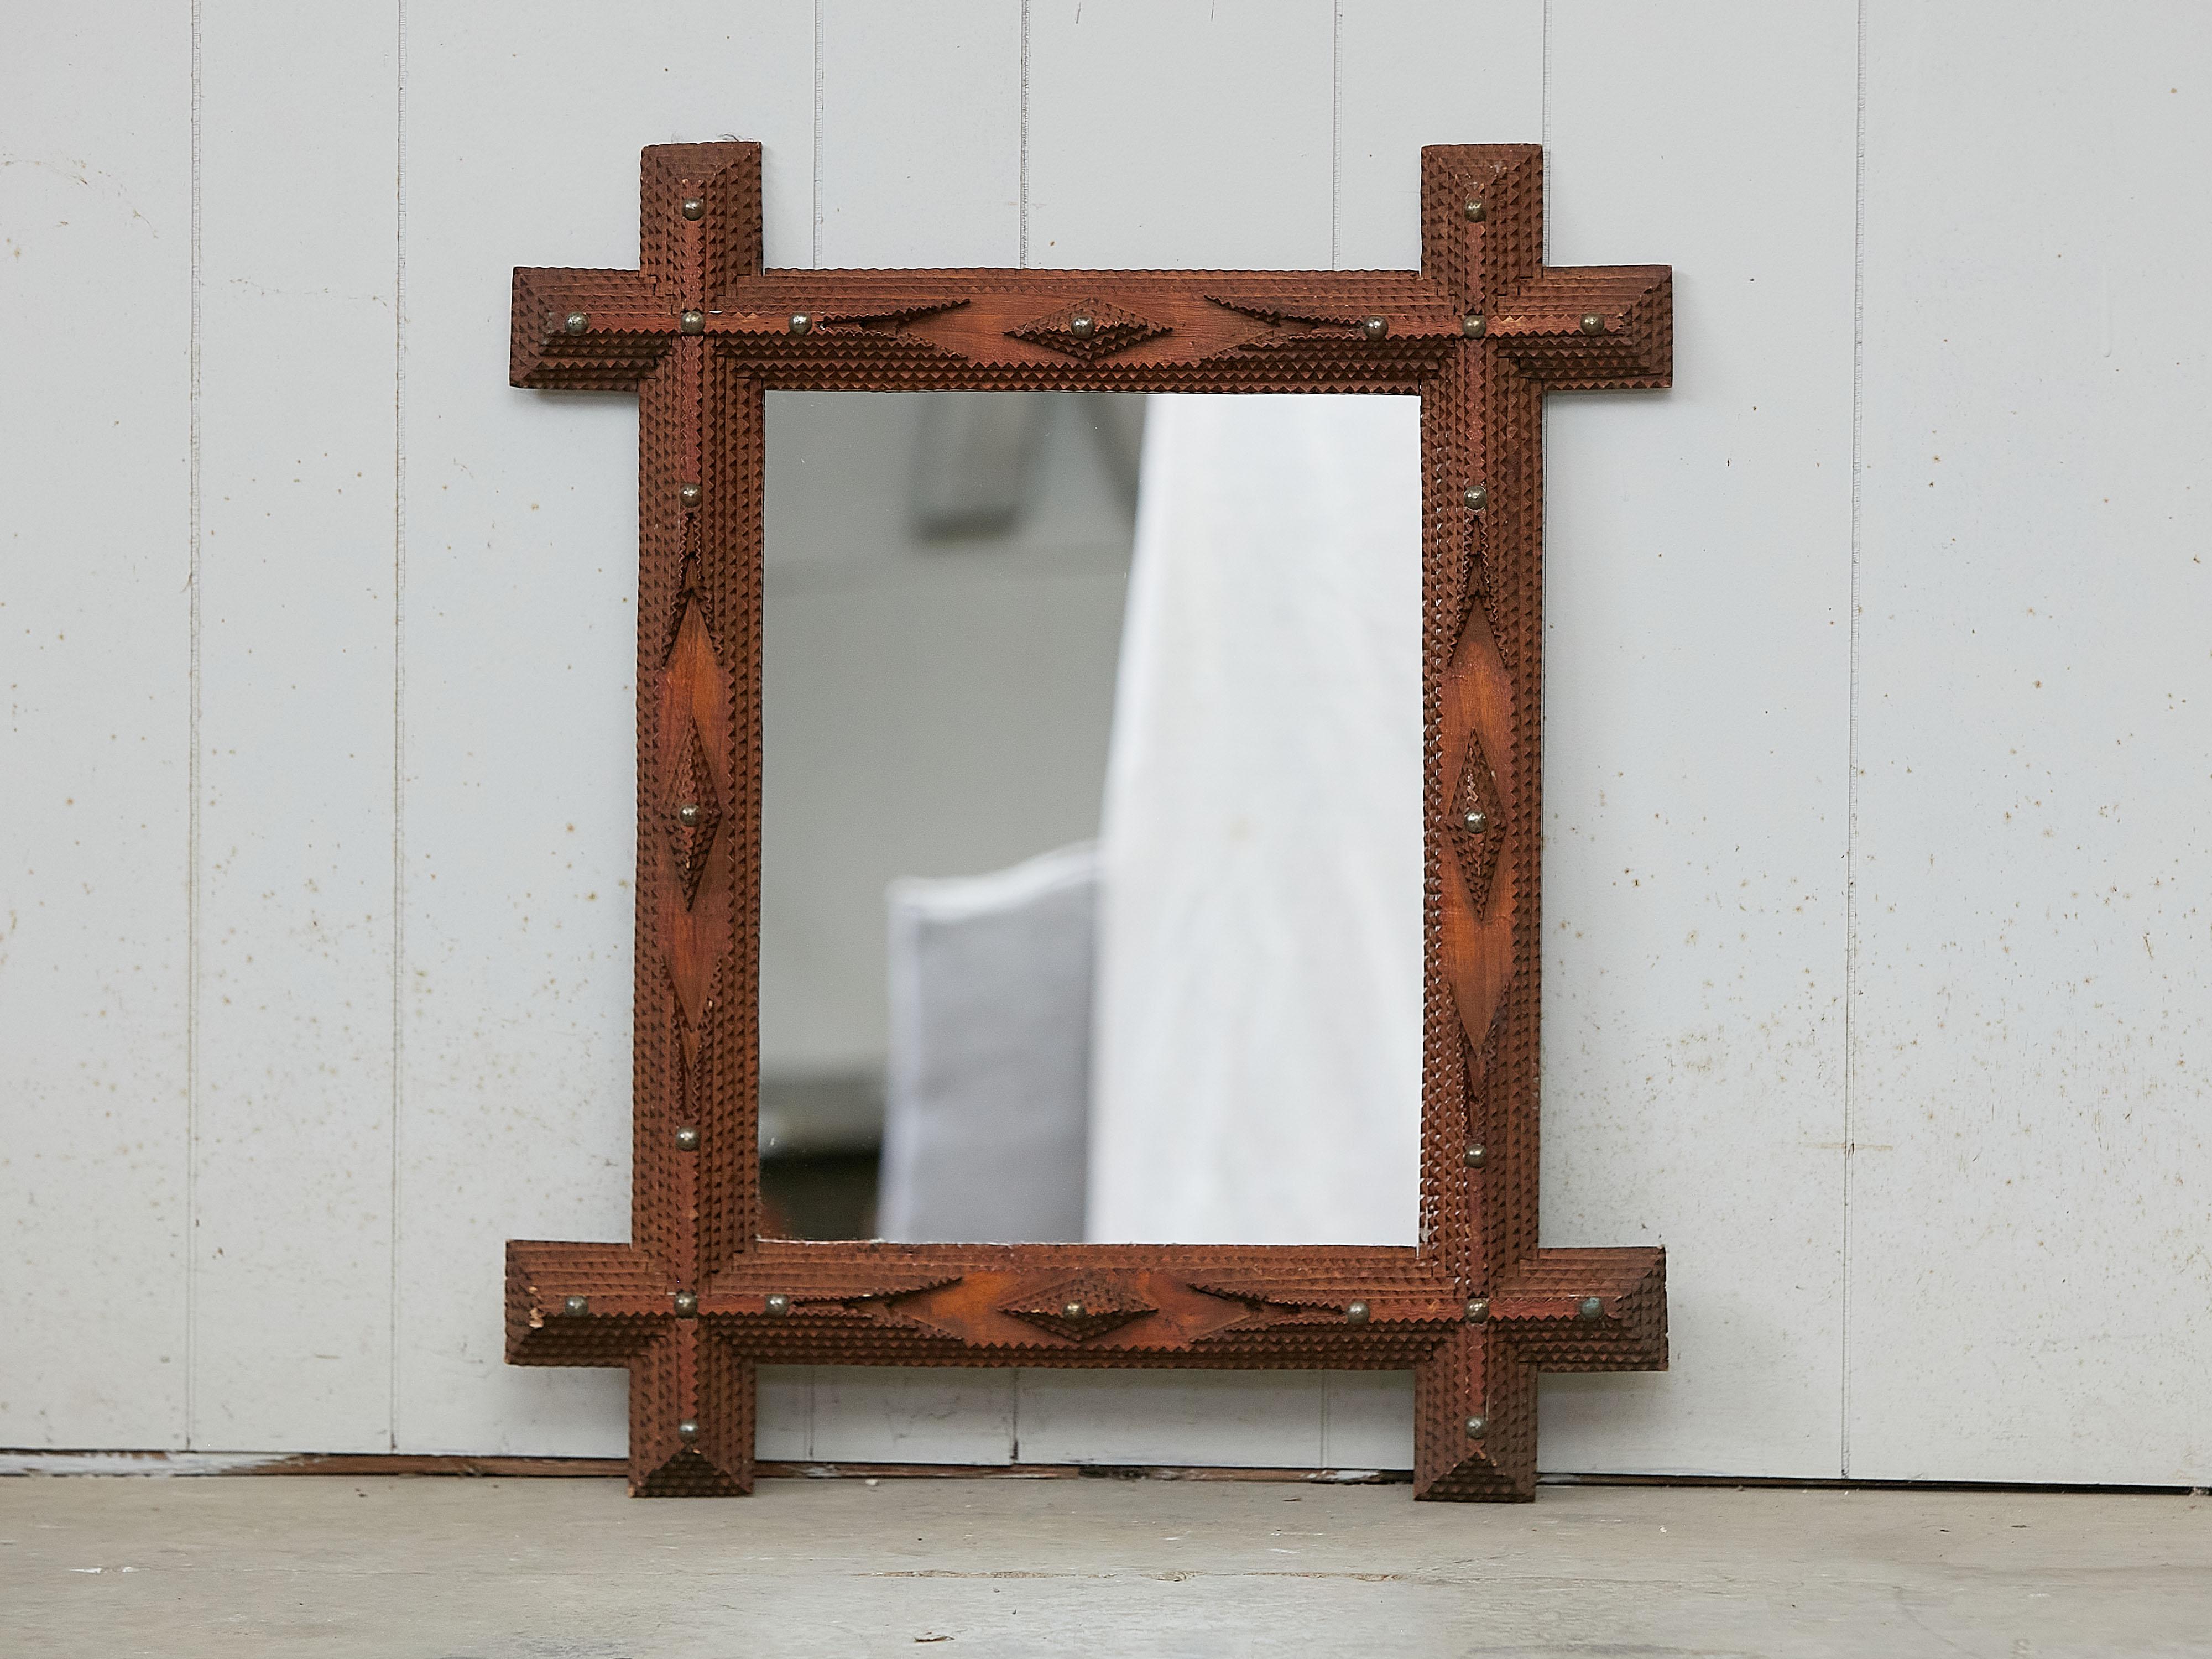 A French rectangular Tramp Art hand-carved wooden mirror from the early 20th century, with raised diamond motifs, geometric patterns and brass nailheads. Created in France during the early years of the 20th century, this wall mirror was hand carved